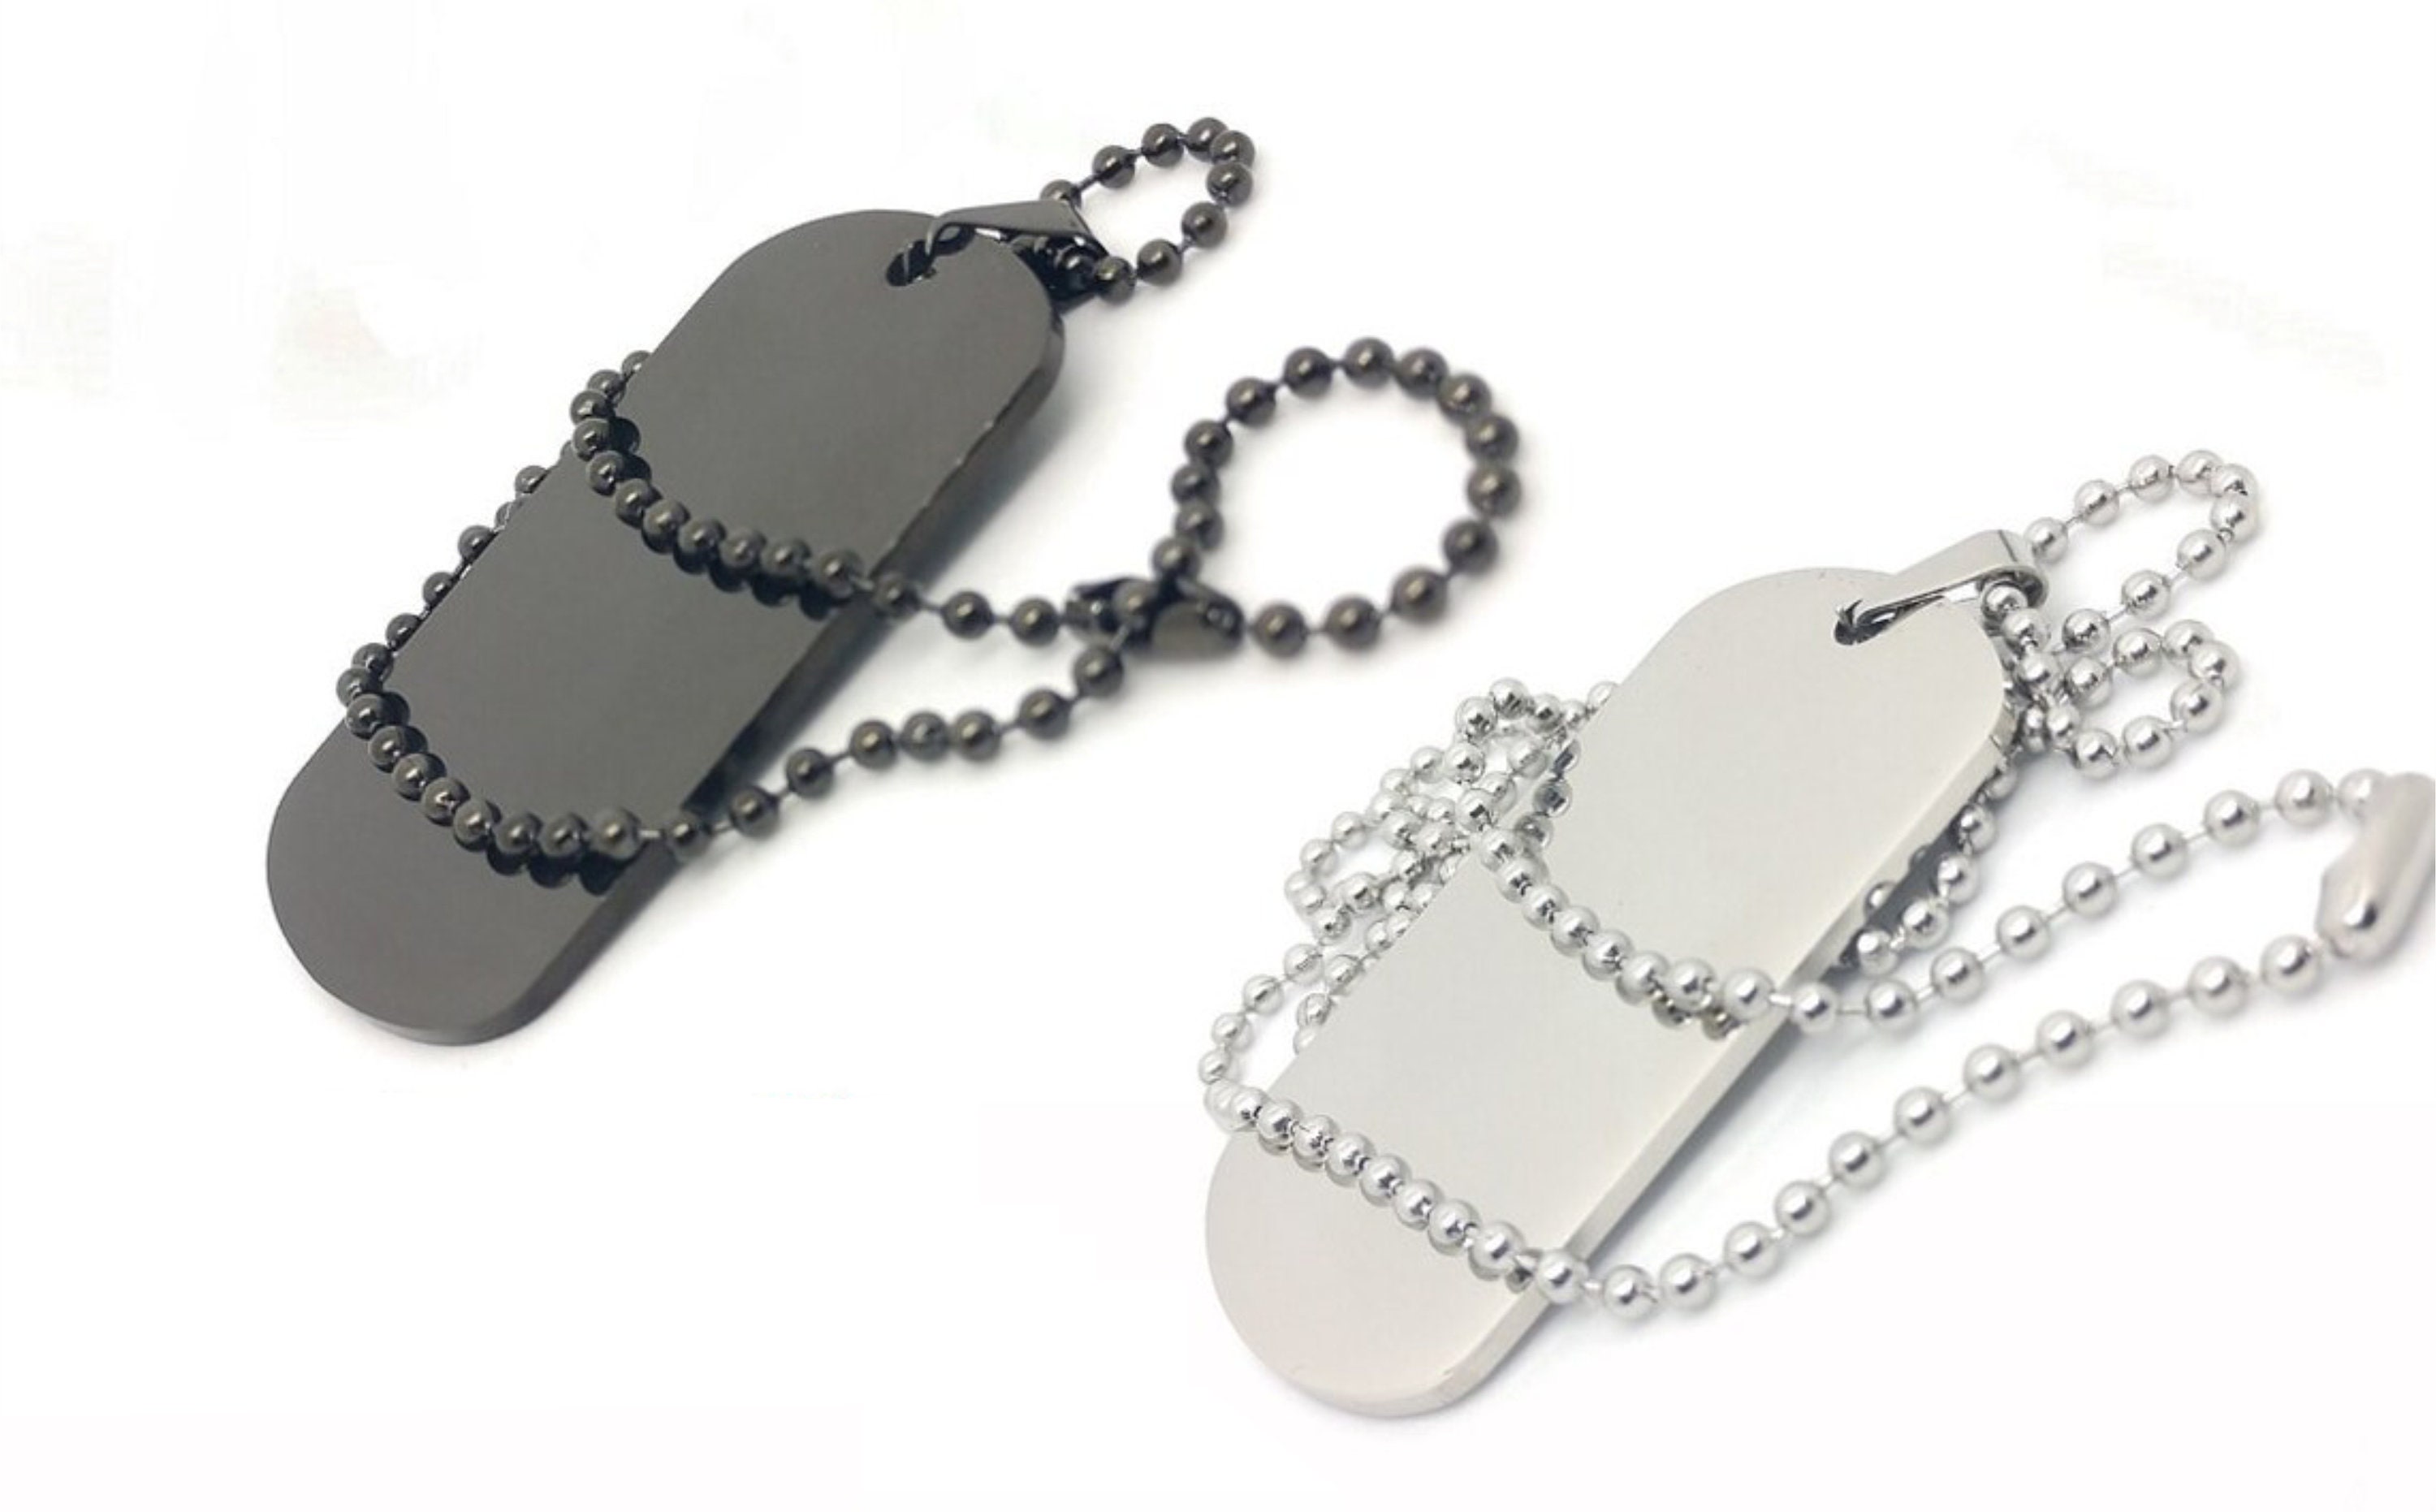 Black Stainless Steel & Zirconia-Studded ID Dog Tag Cable Chain